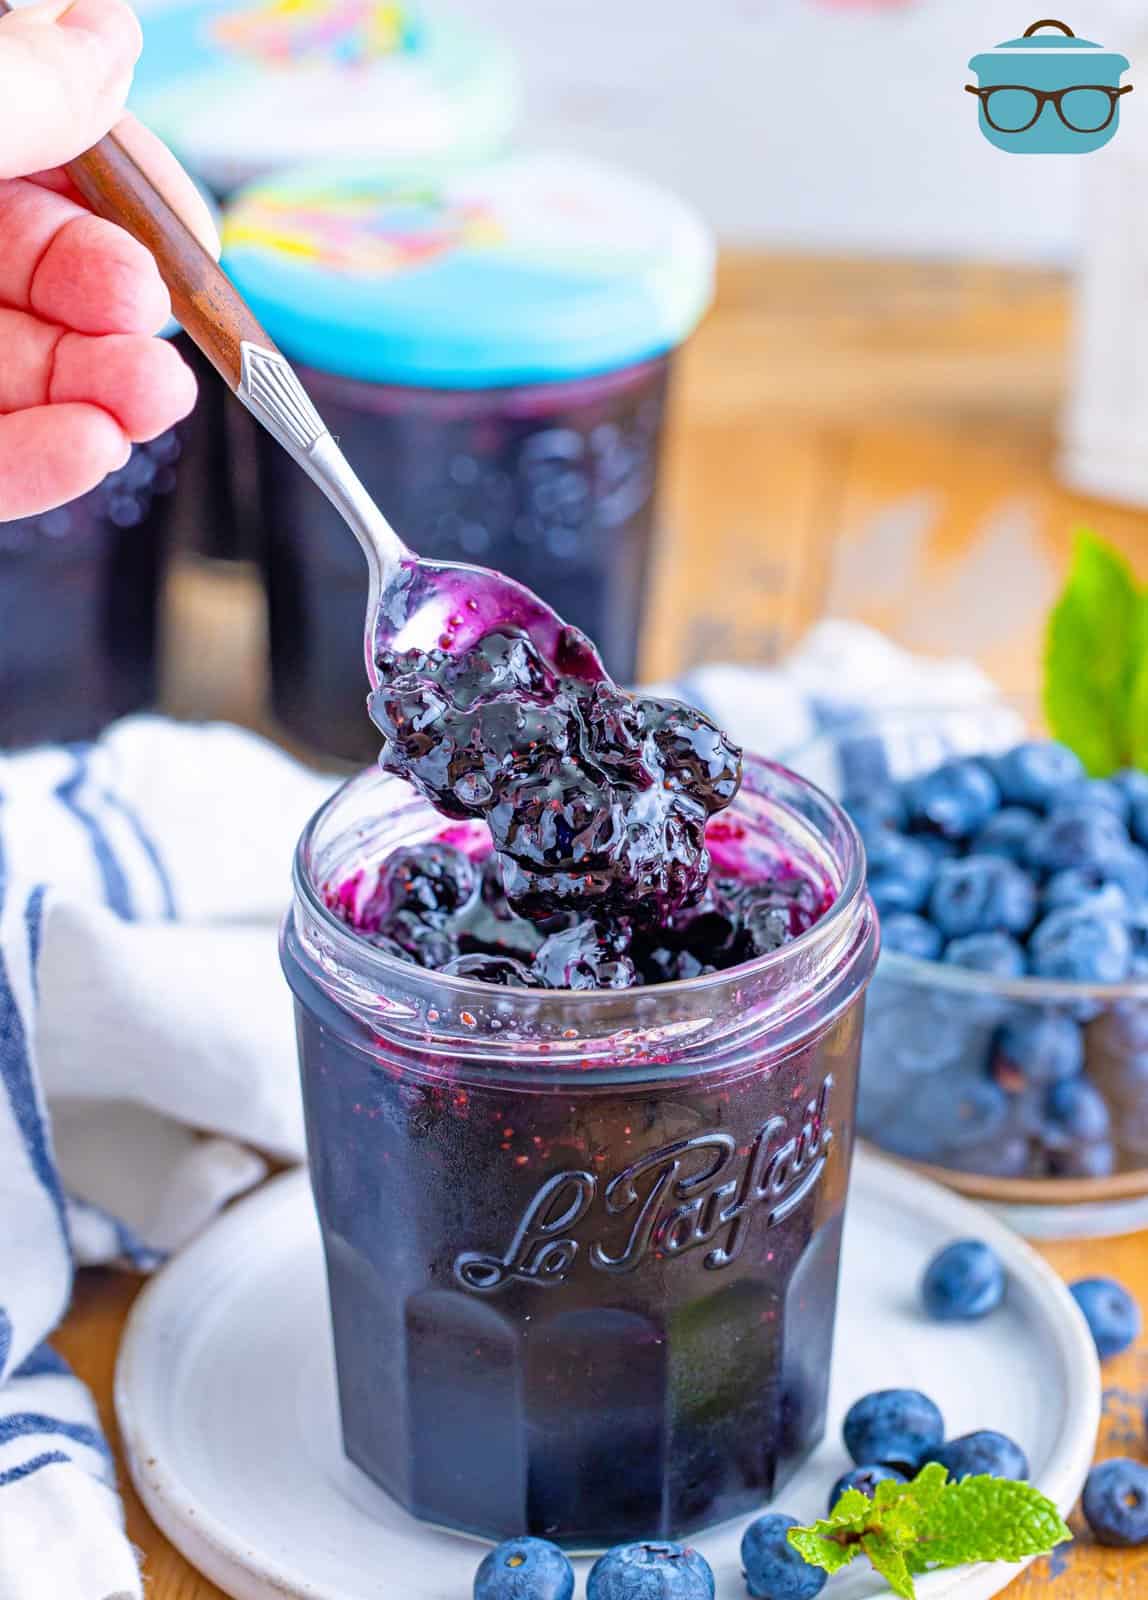 A spoon holding some blueberry jam over the jar of it.